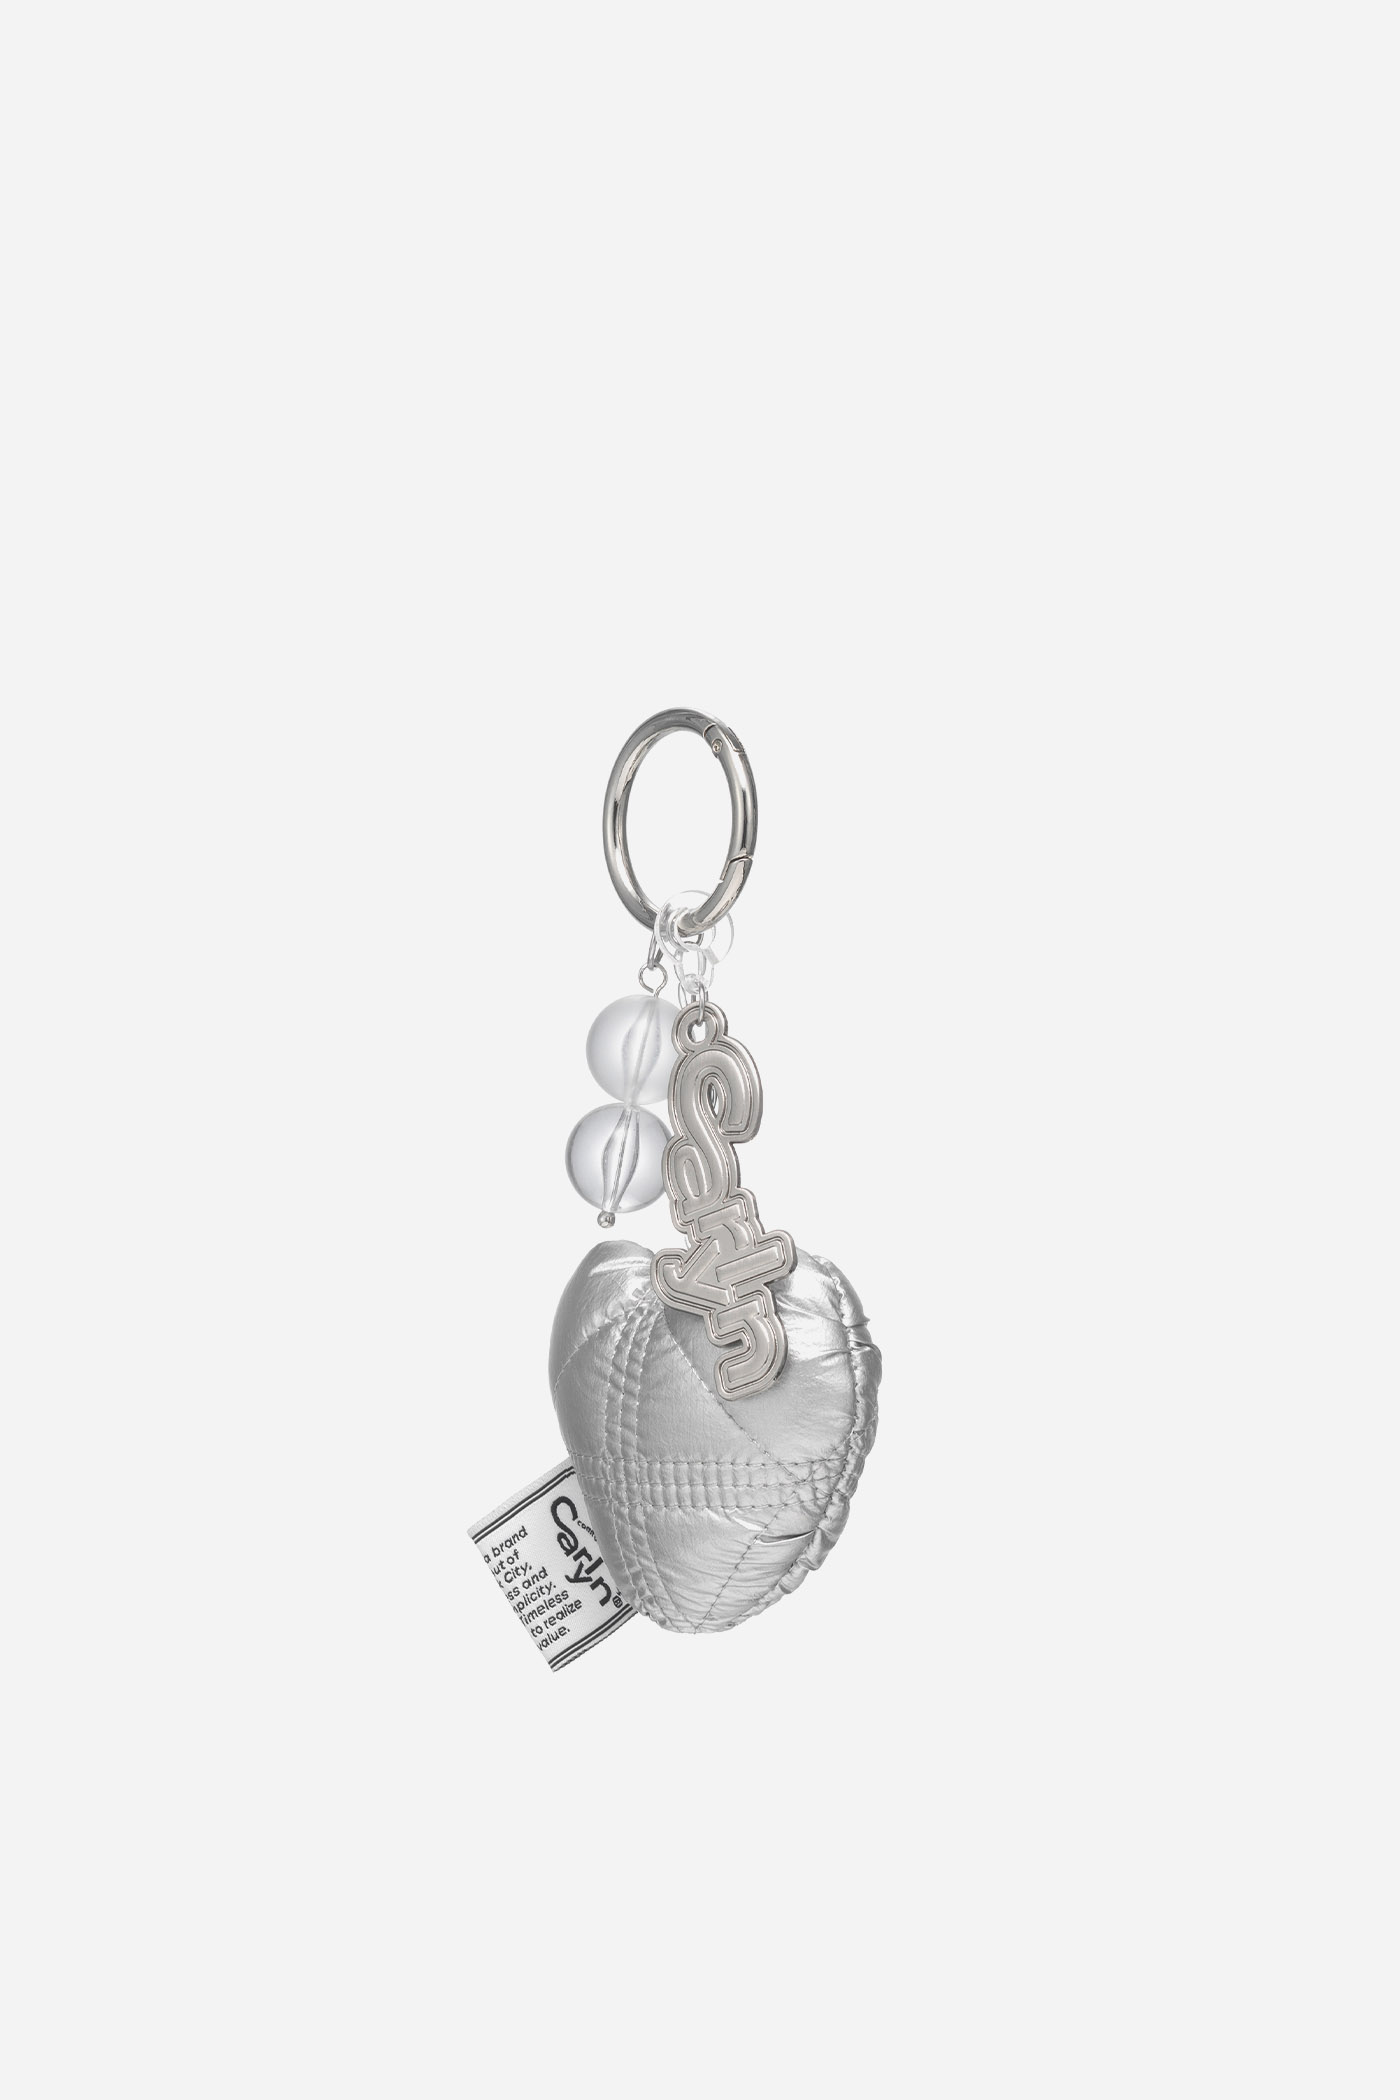 Shop CARLYN Cotton Heart Bag Charm (6colors) J73105010 Keychain by  *yunhee'sshop*